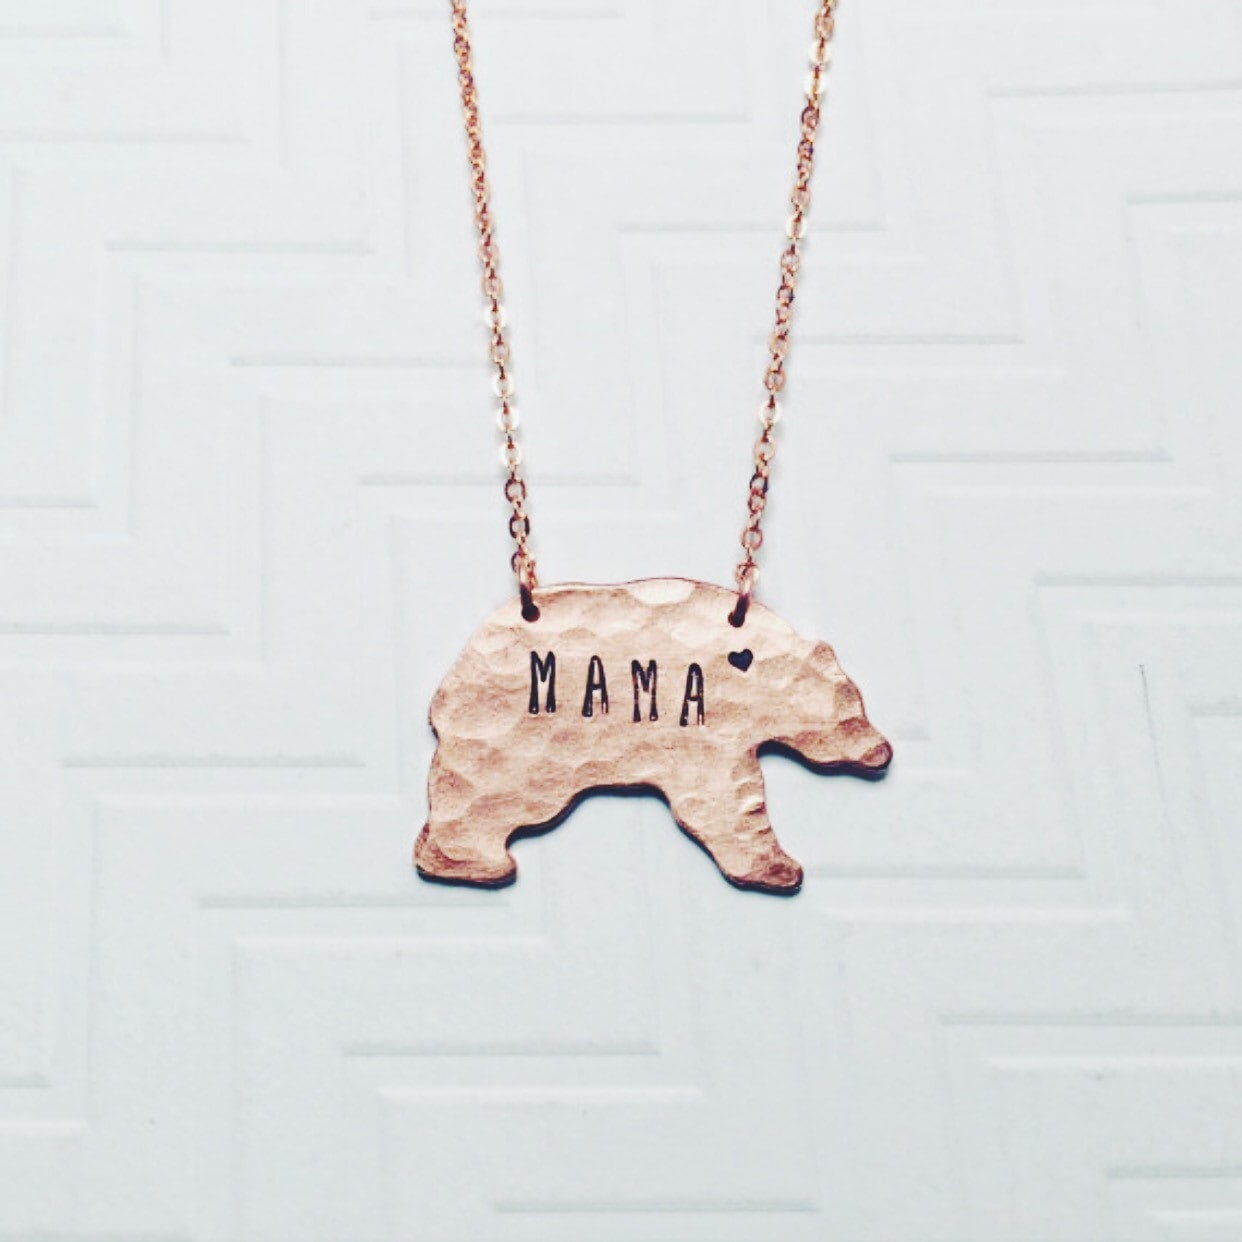 Mama Bear Necklace - Hand Stamped Necklace - Gift For Mom - Gift For Her - Mothers Day Gift - Copper Rose Gold - Heart